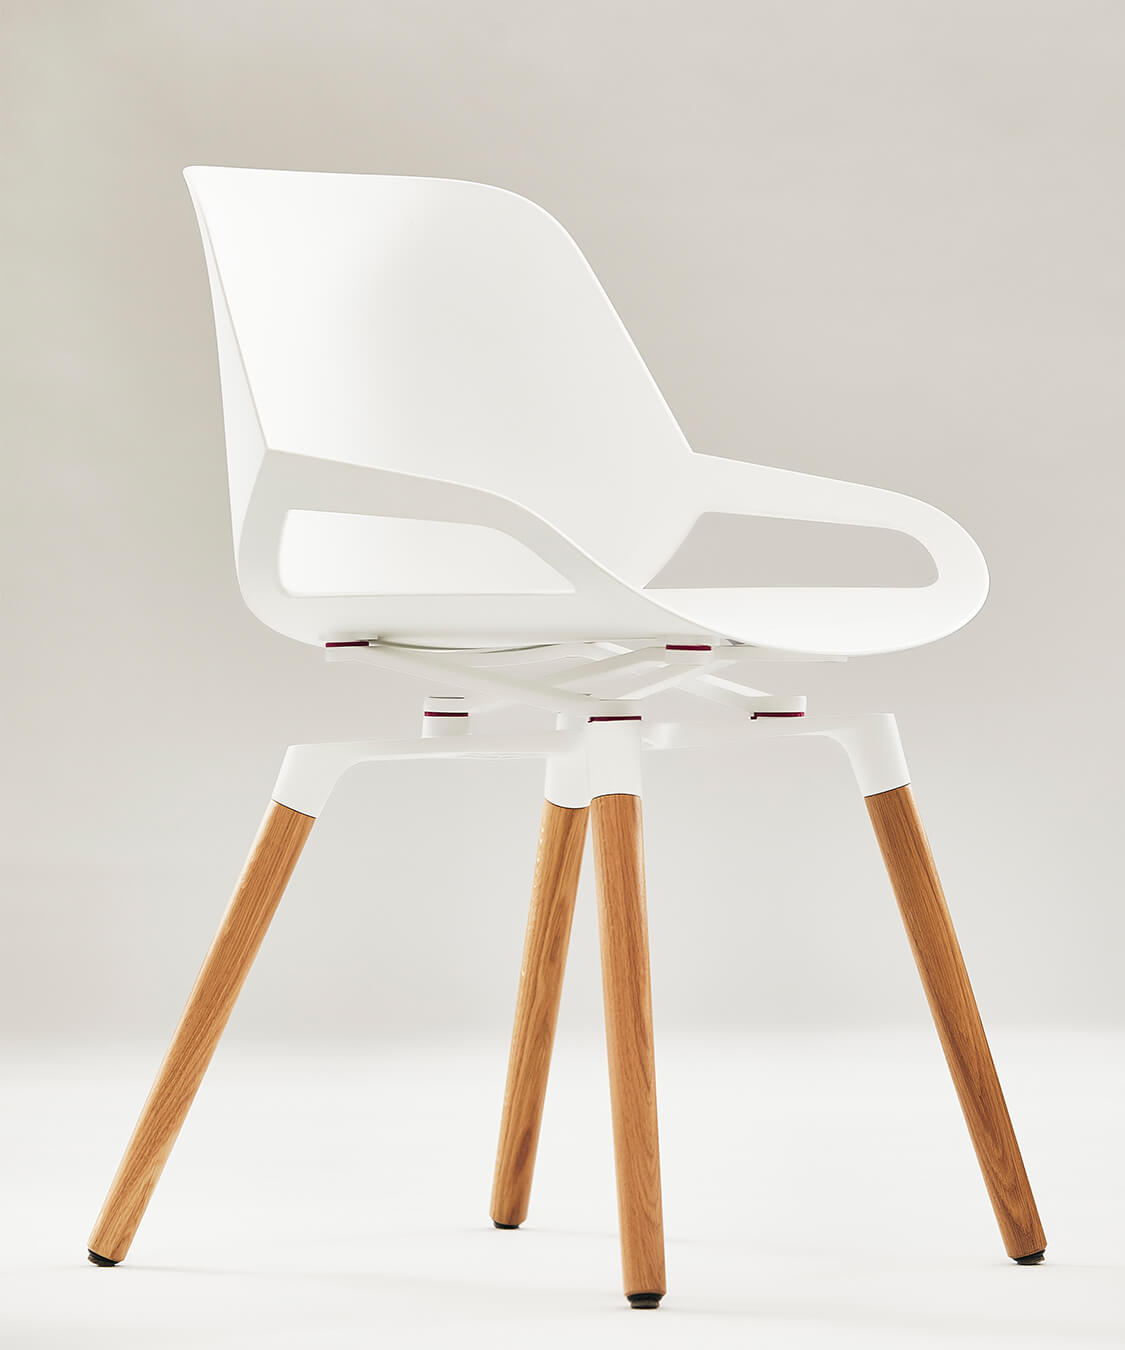 Aeris Numo with white seat shell and wooden legs